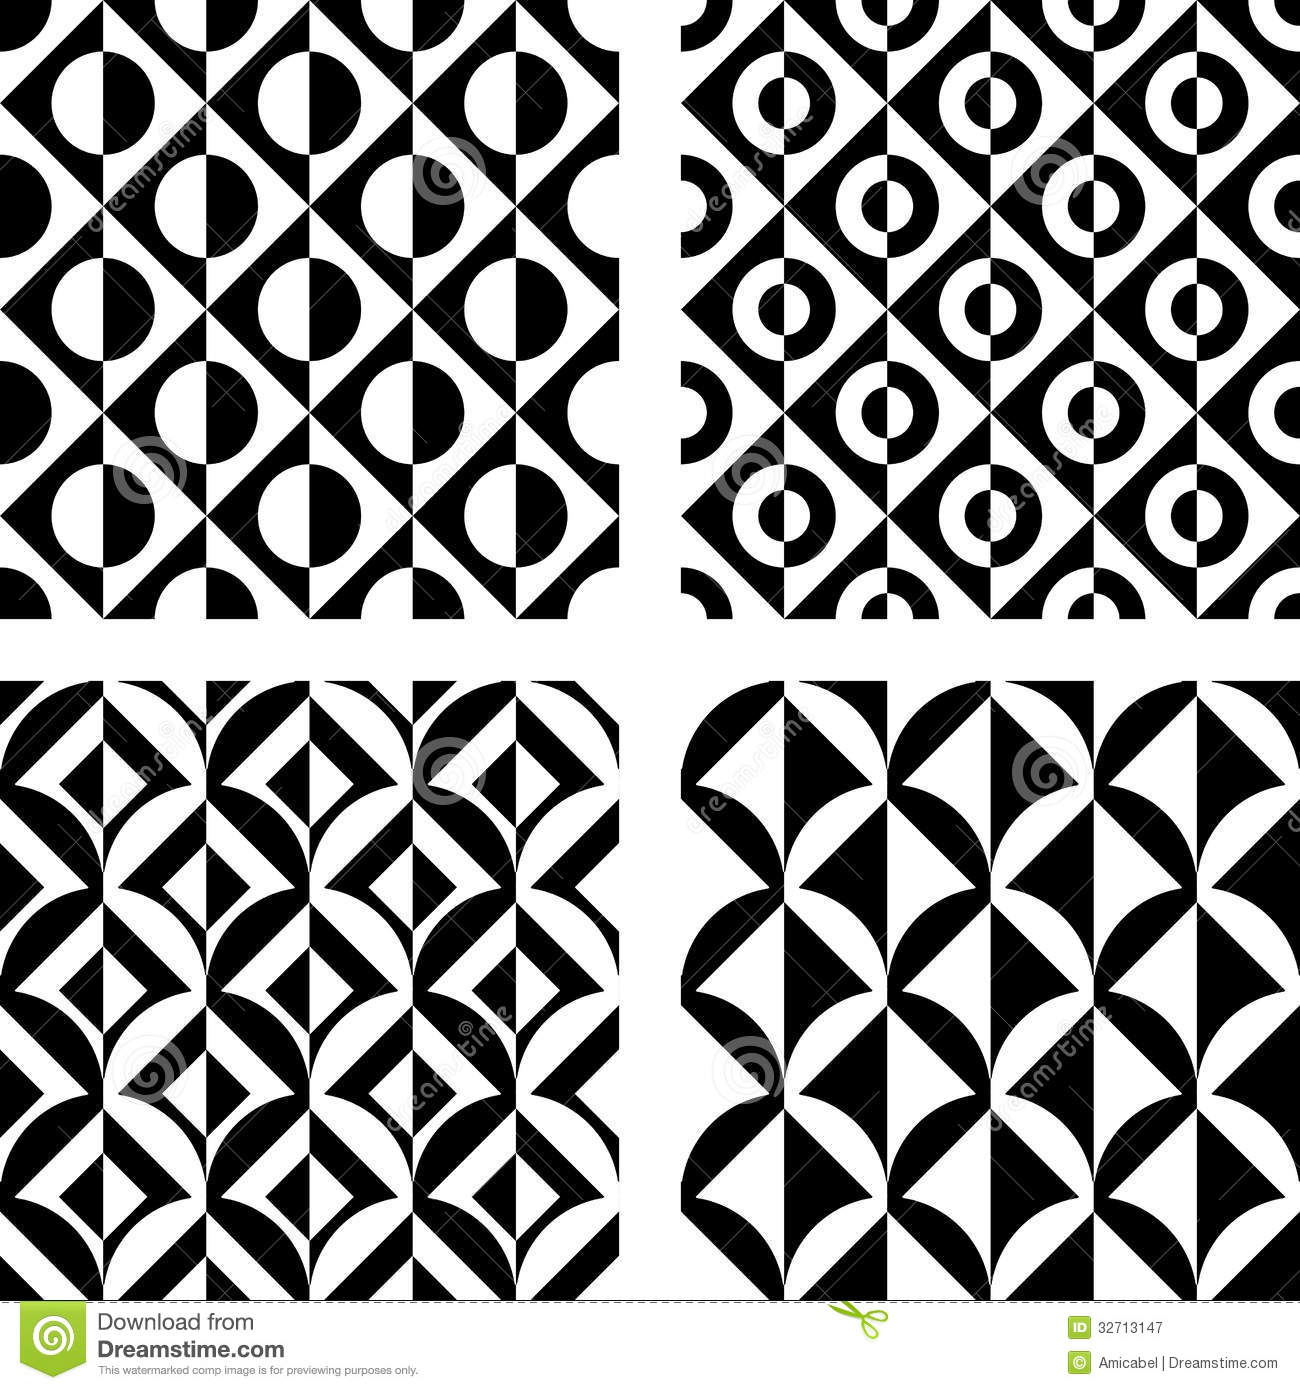 Geometric Patterns and Designs